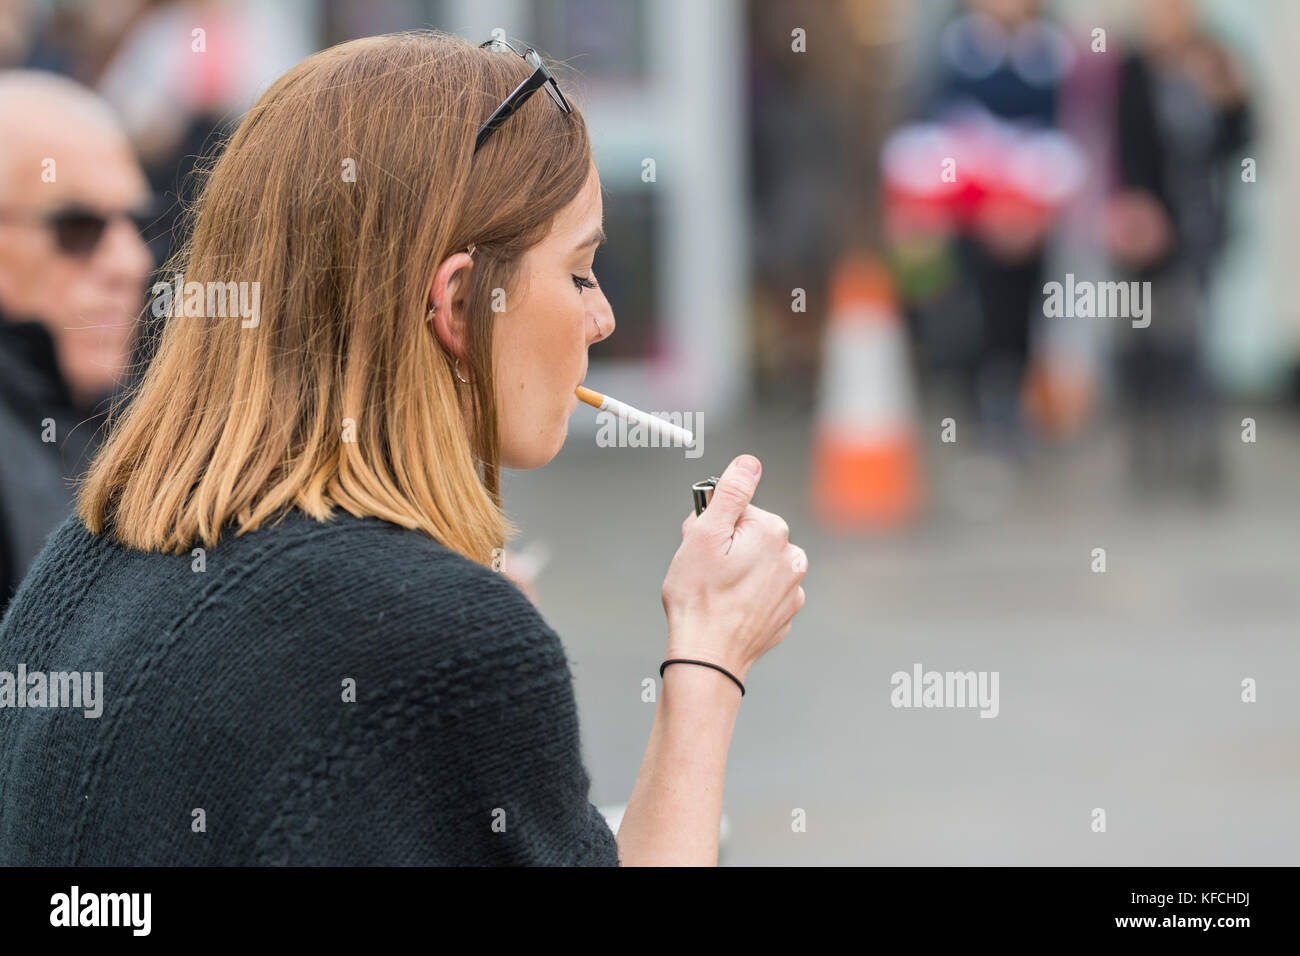 Young Caucasian woman lighting a cigarette in the UK. Unhealthy lifestyle. Stock Photo